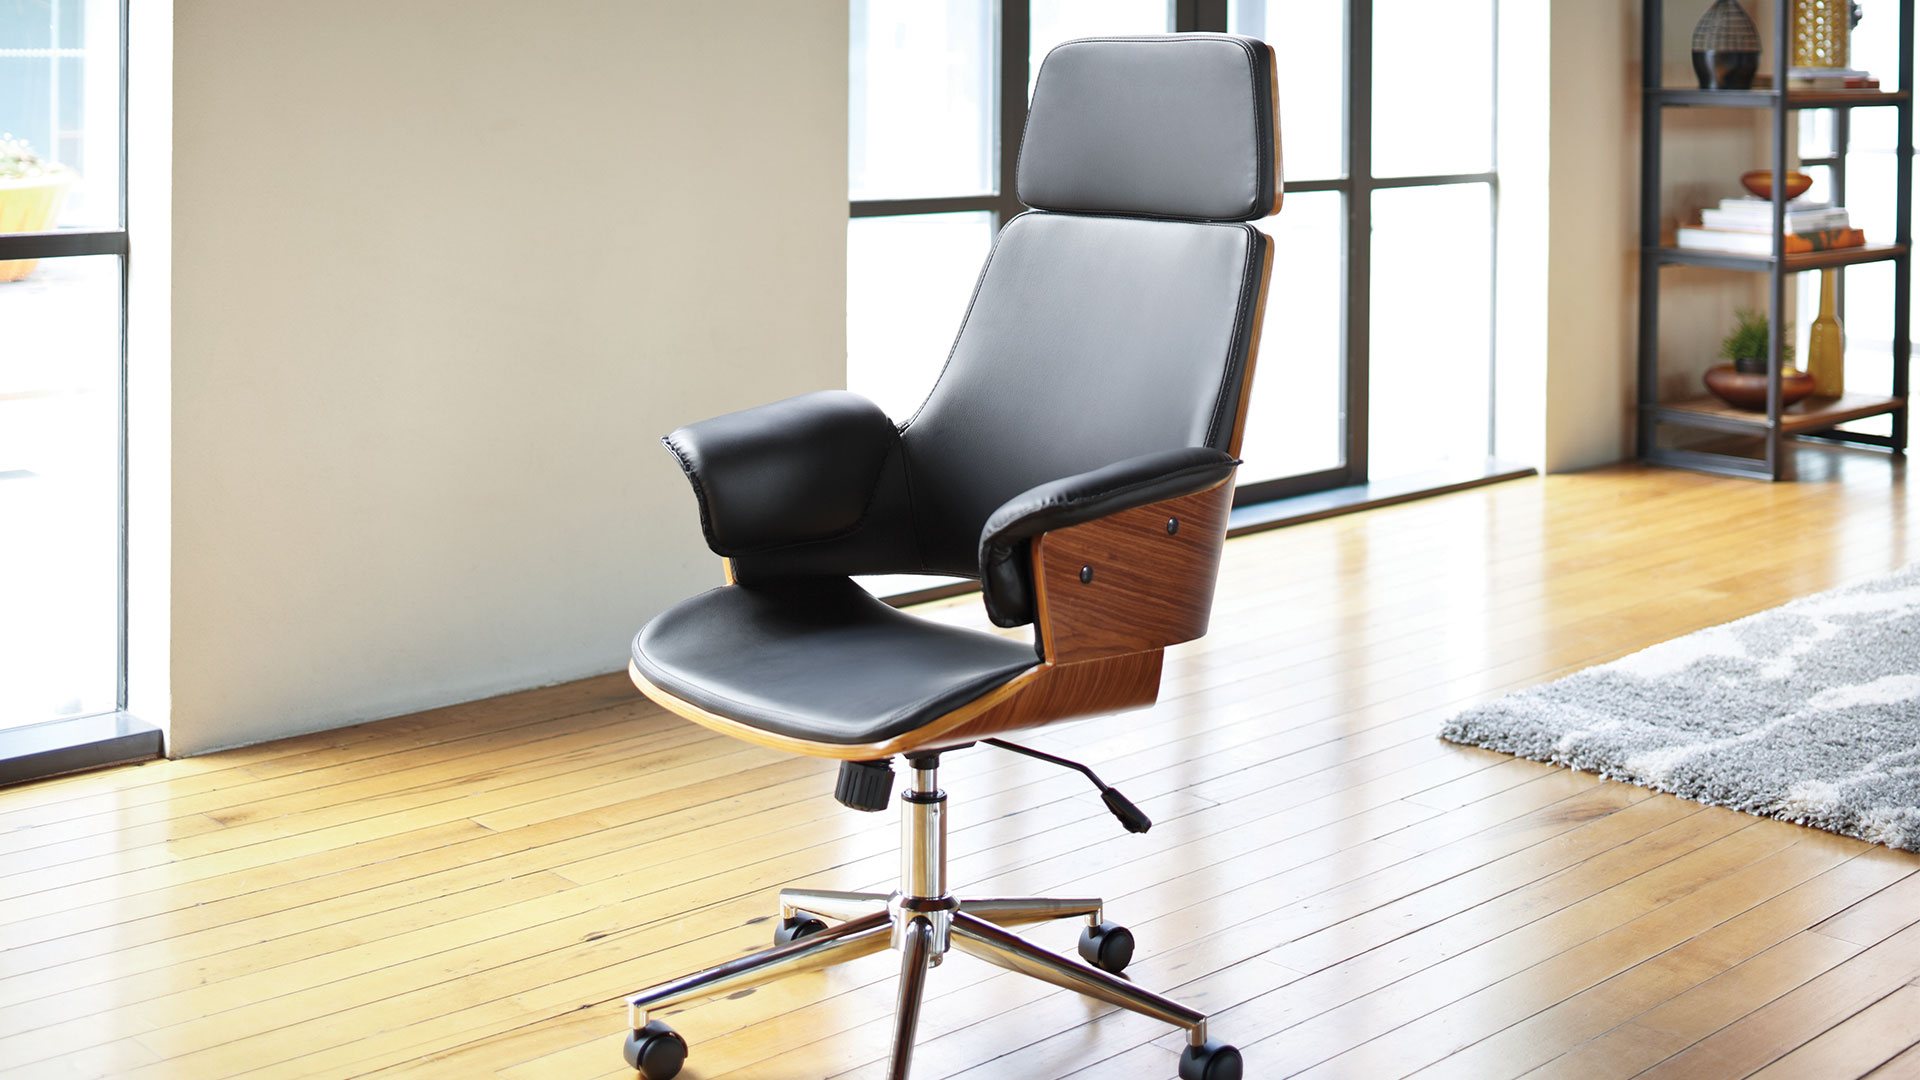 The Best Office Chairs Under 100 for 2020 Models]